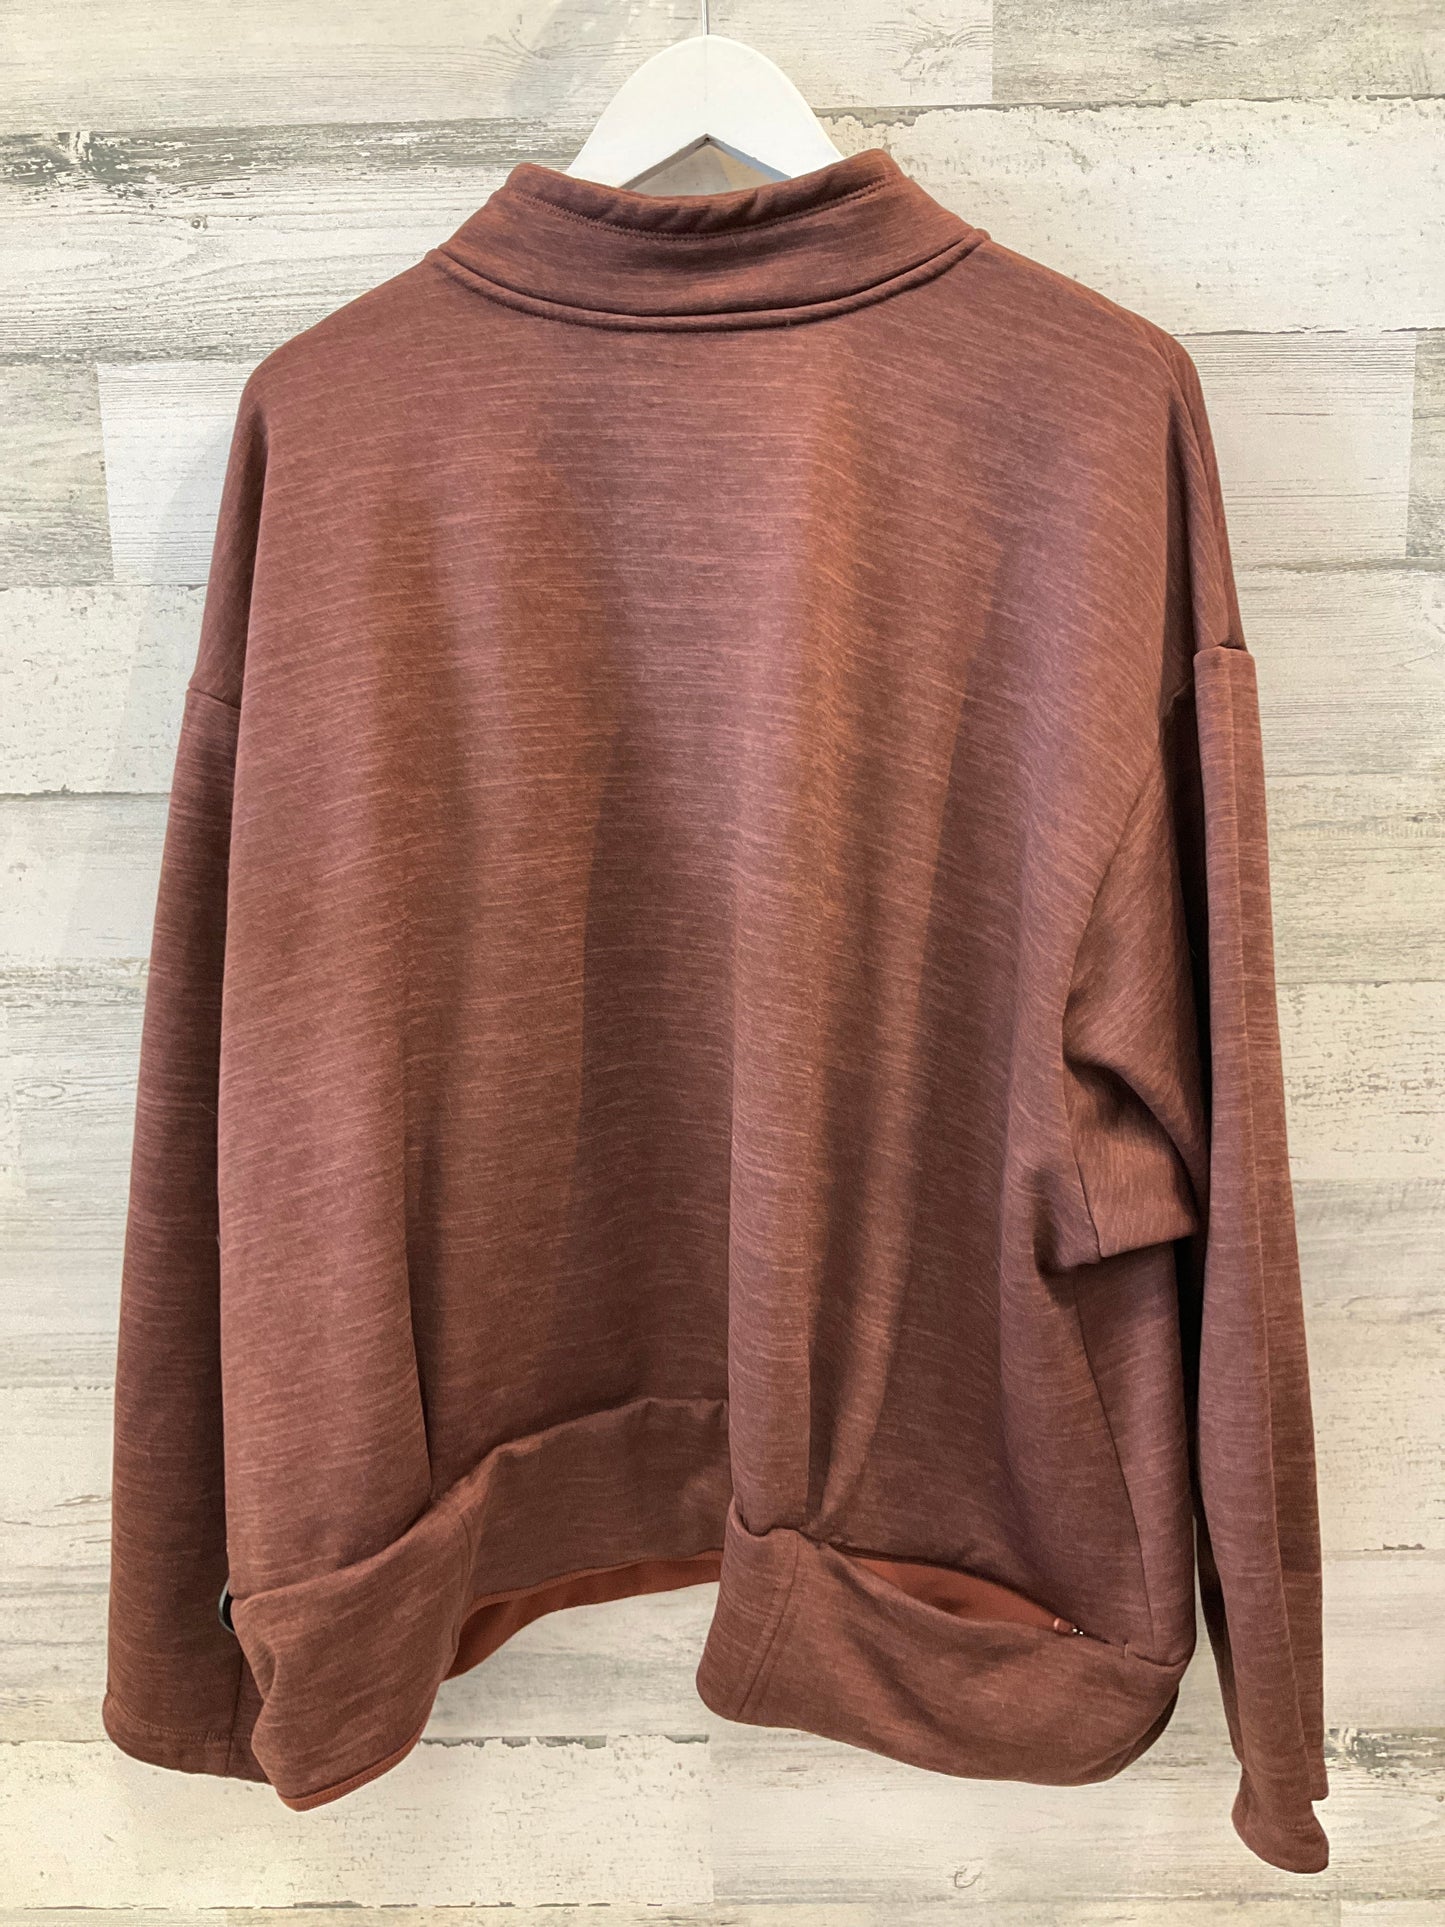 Athletic Top Long Sleeve Collar By Athleta  Size: 3x